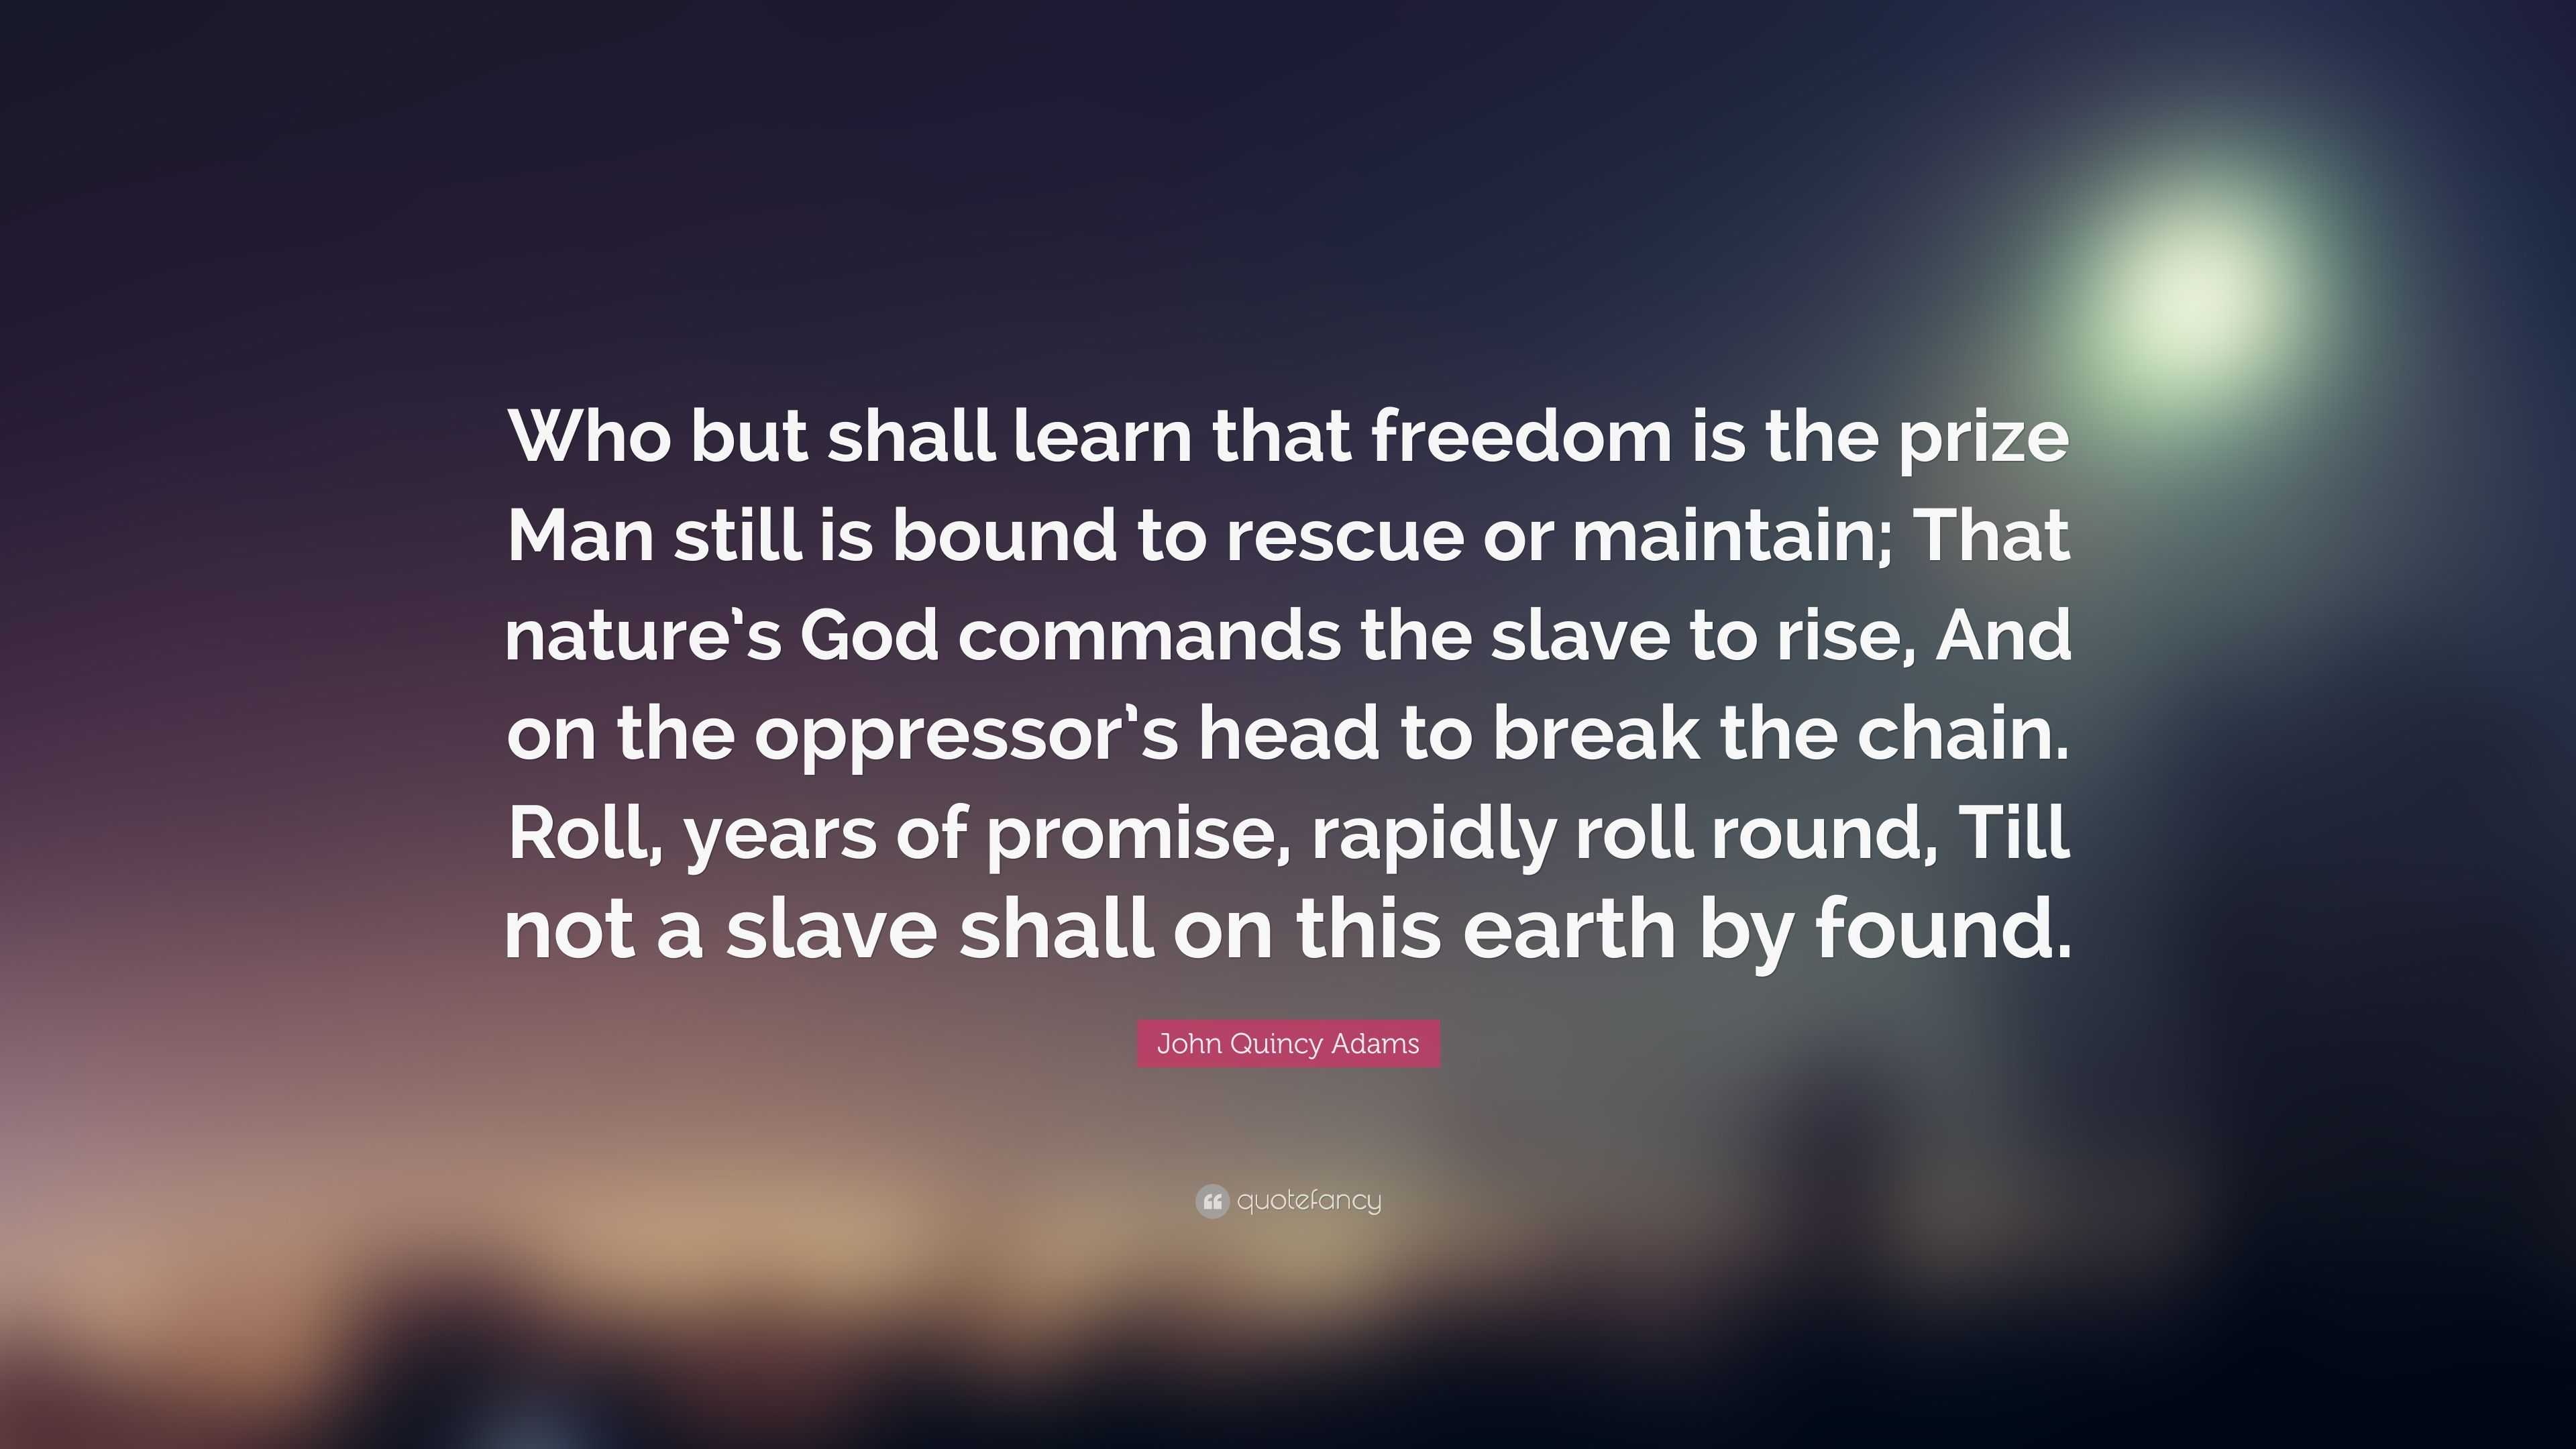 John Quincy Adams Quote: “Who but shall learn that freedom is the prize ...